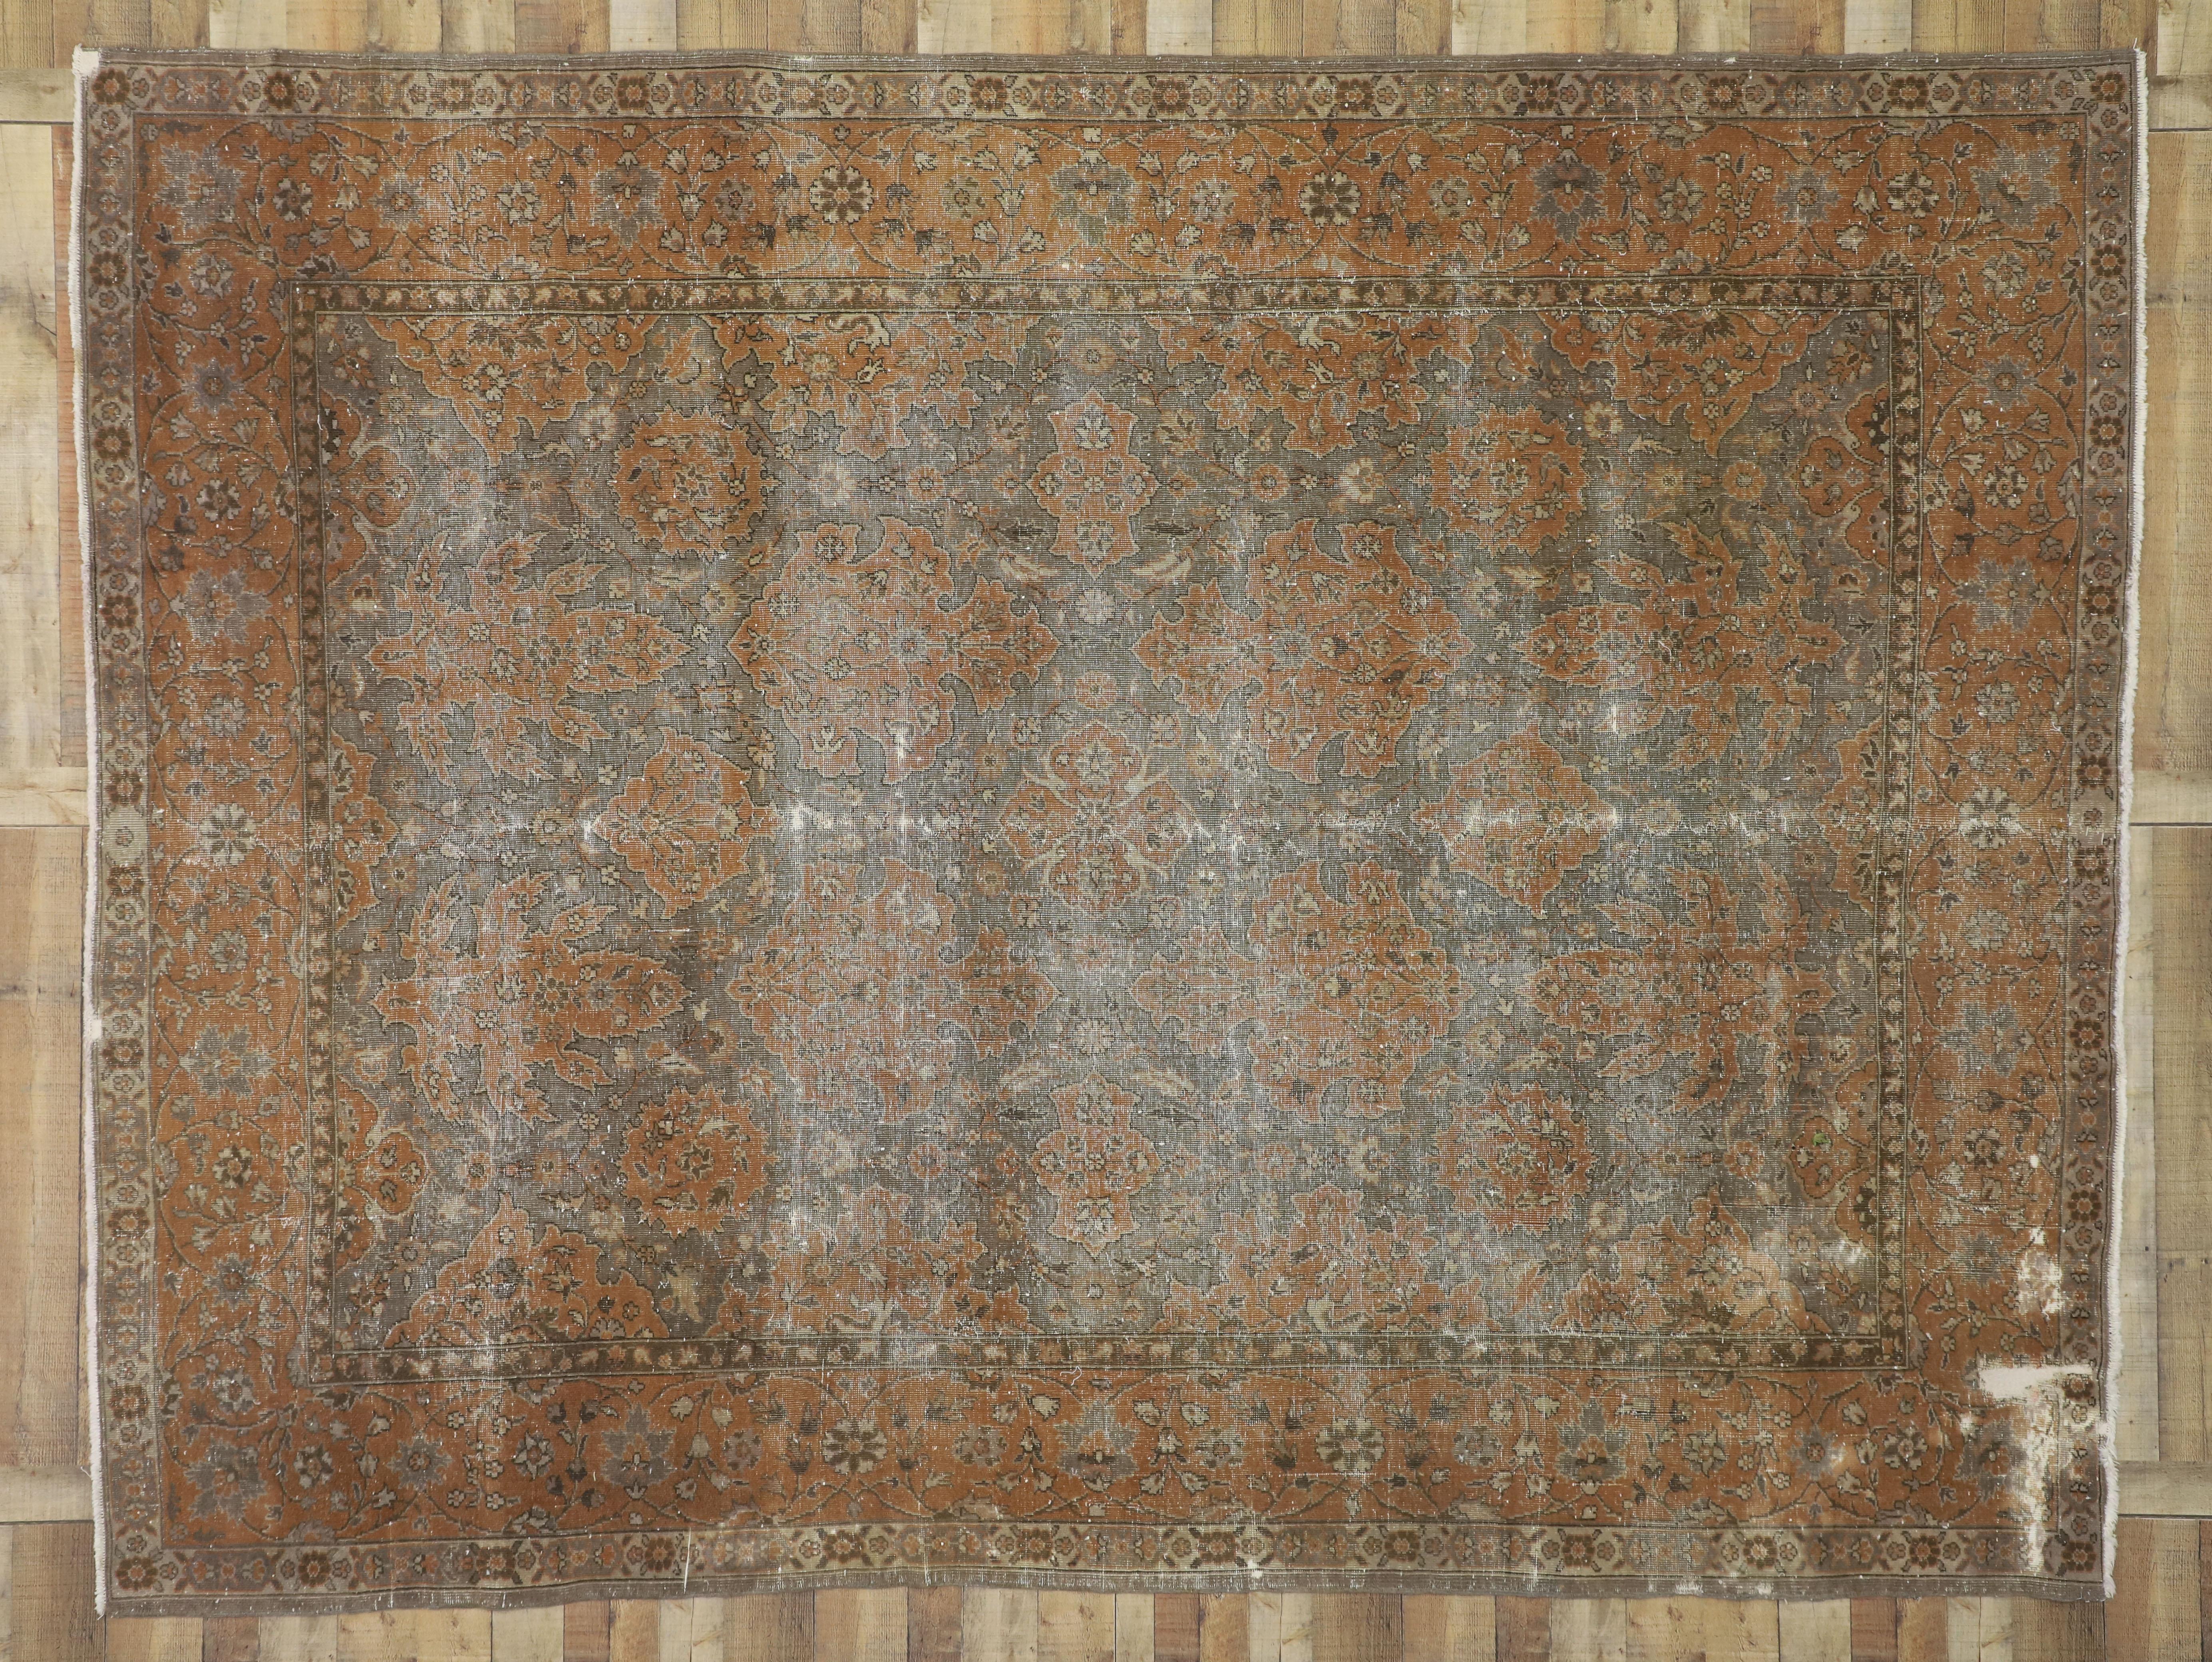 20th Century Distressed Antique Turkish Sparta Area Rug with Industrial Machine Age Style